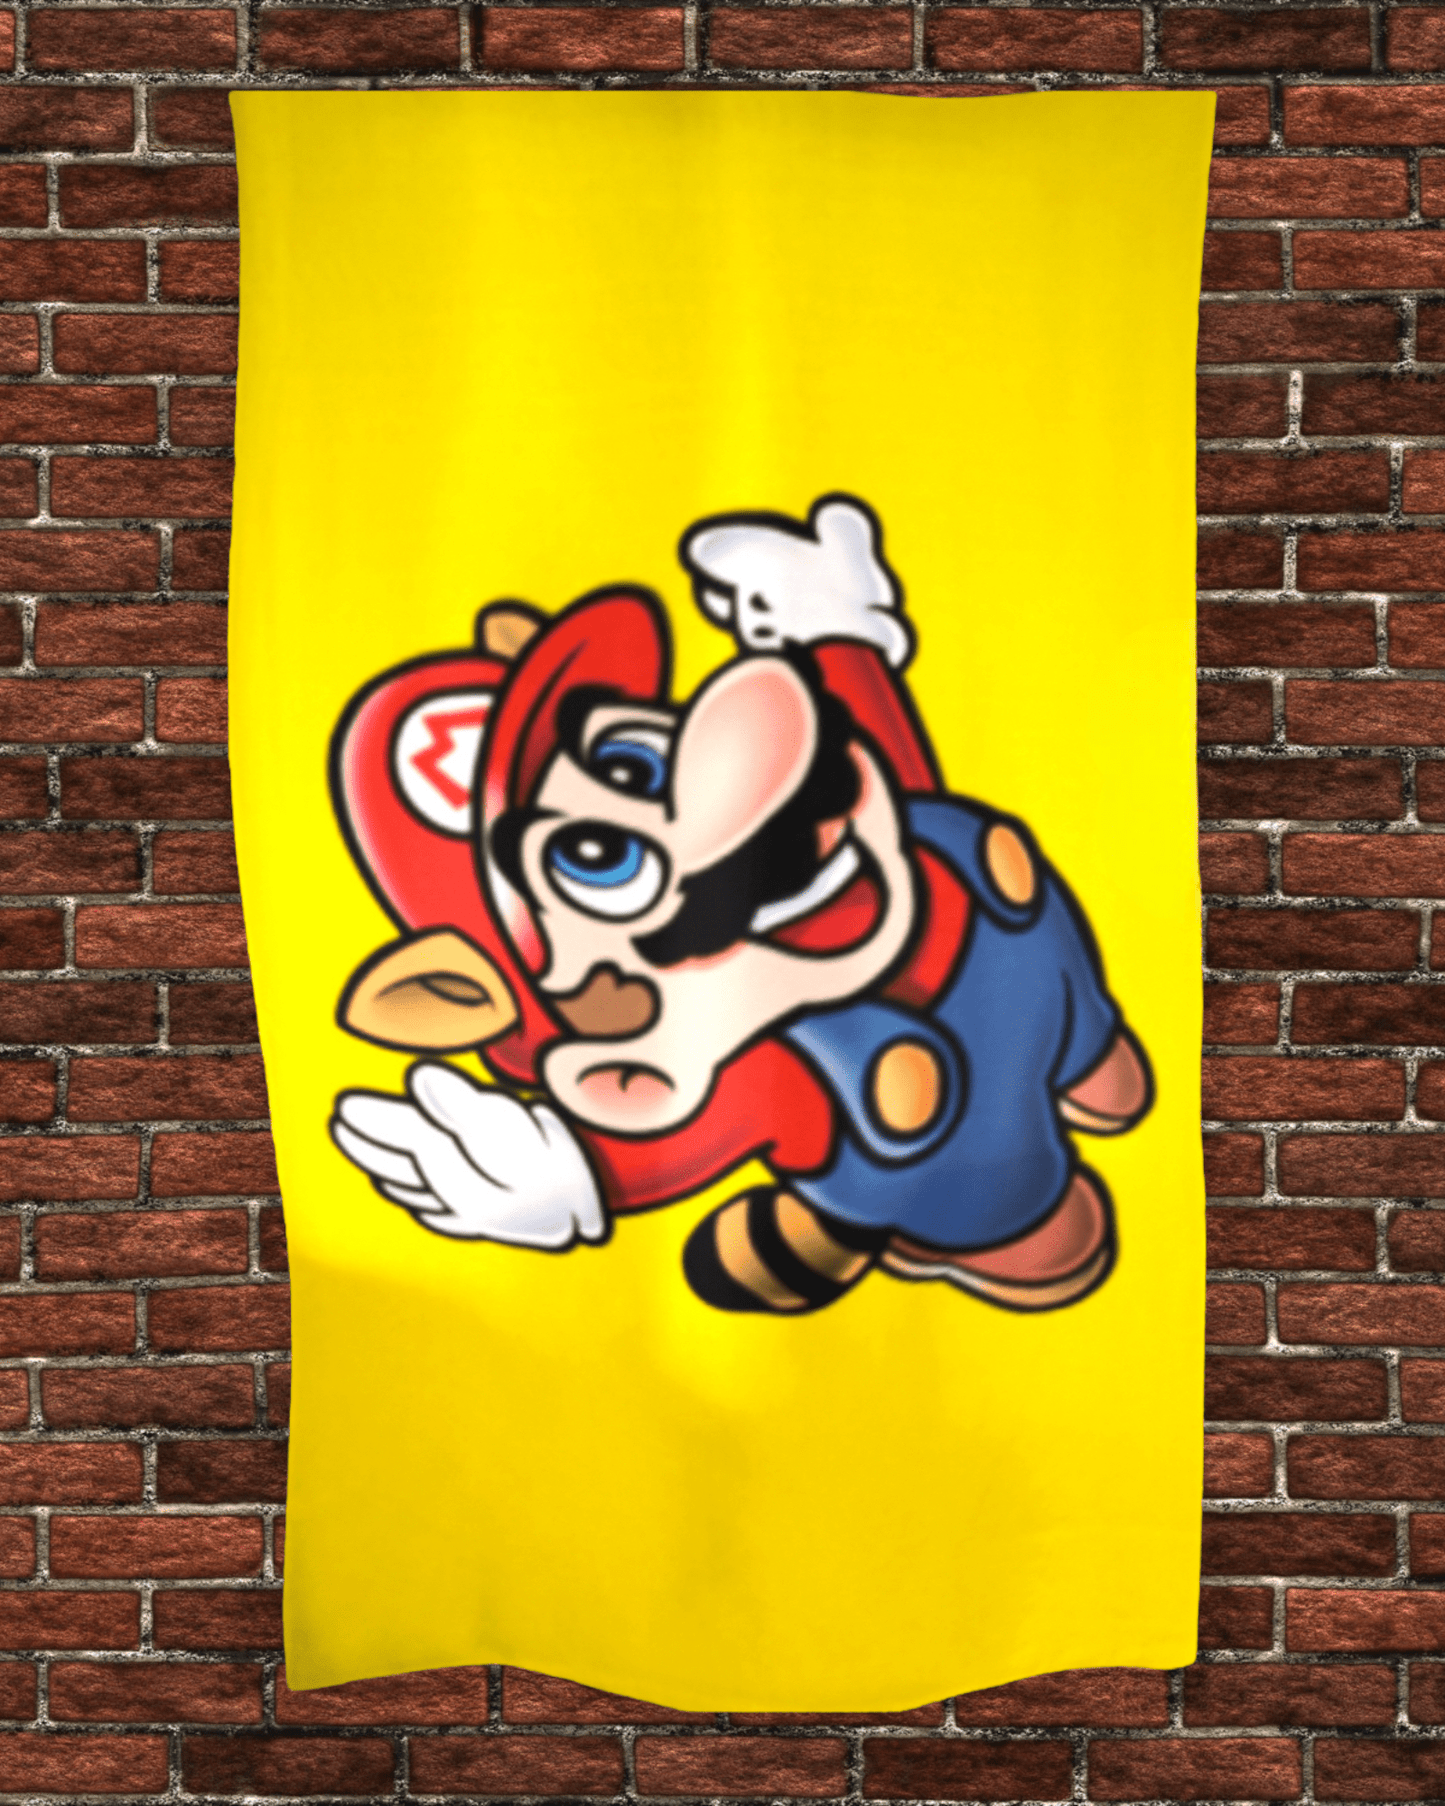 36" x 60" Super Mario Tapestry Wall Hanging Décor